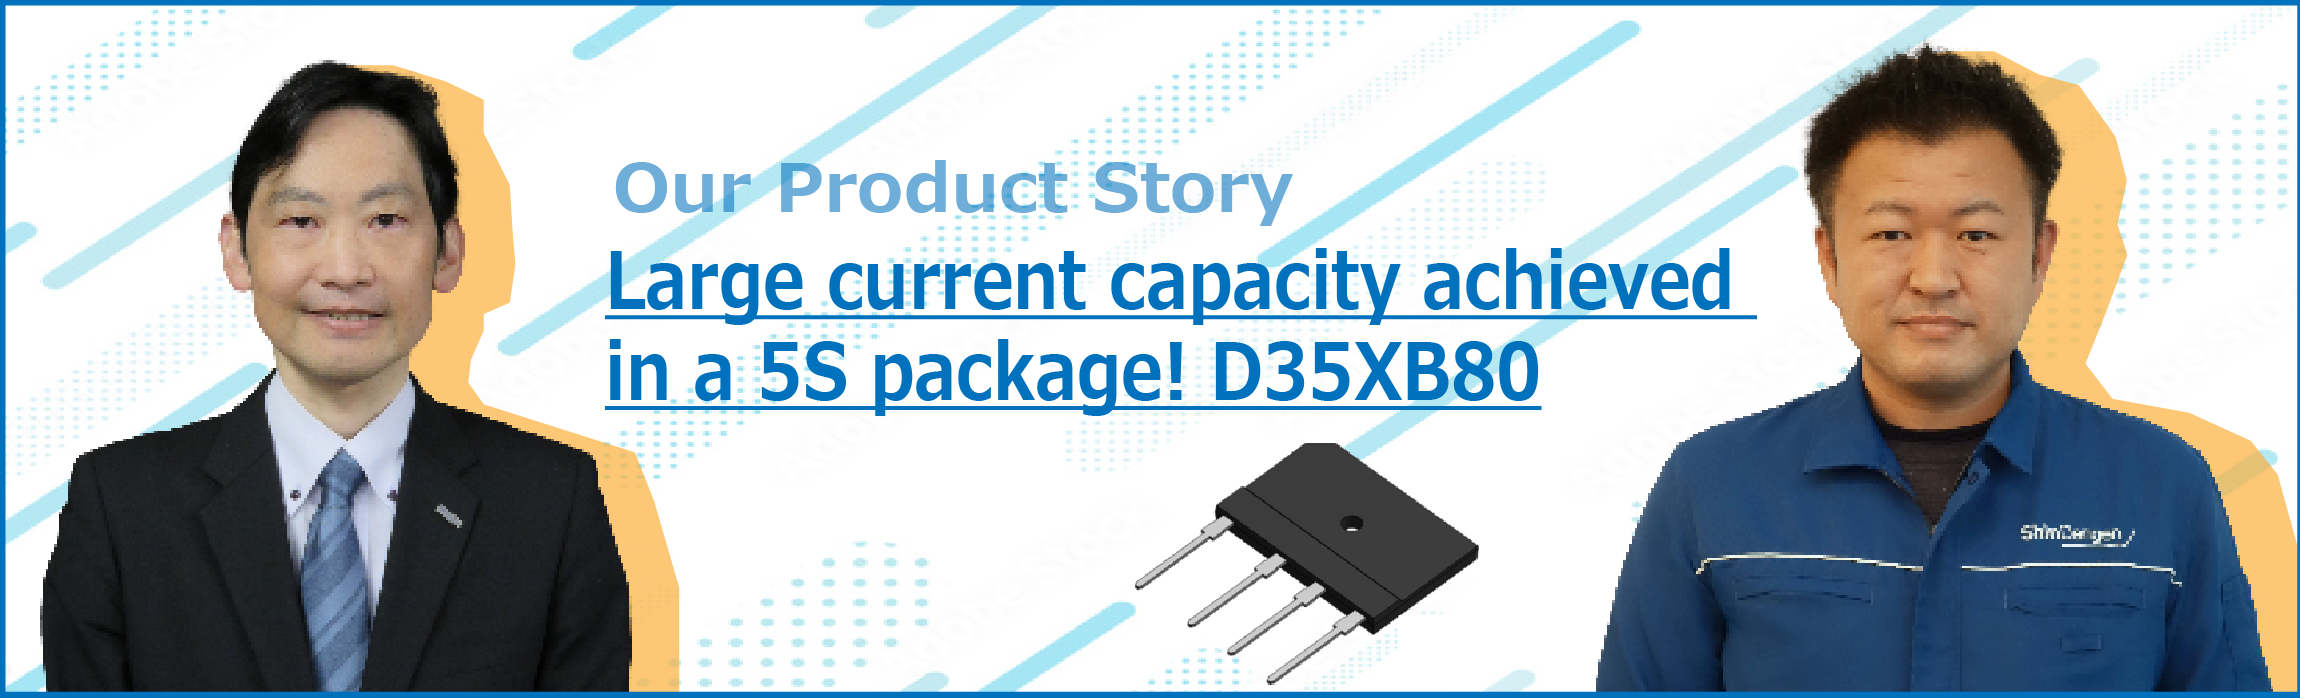 Large current capacity achieved in a 5S package! D35XB80